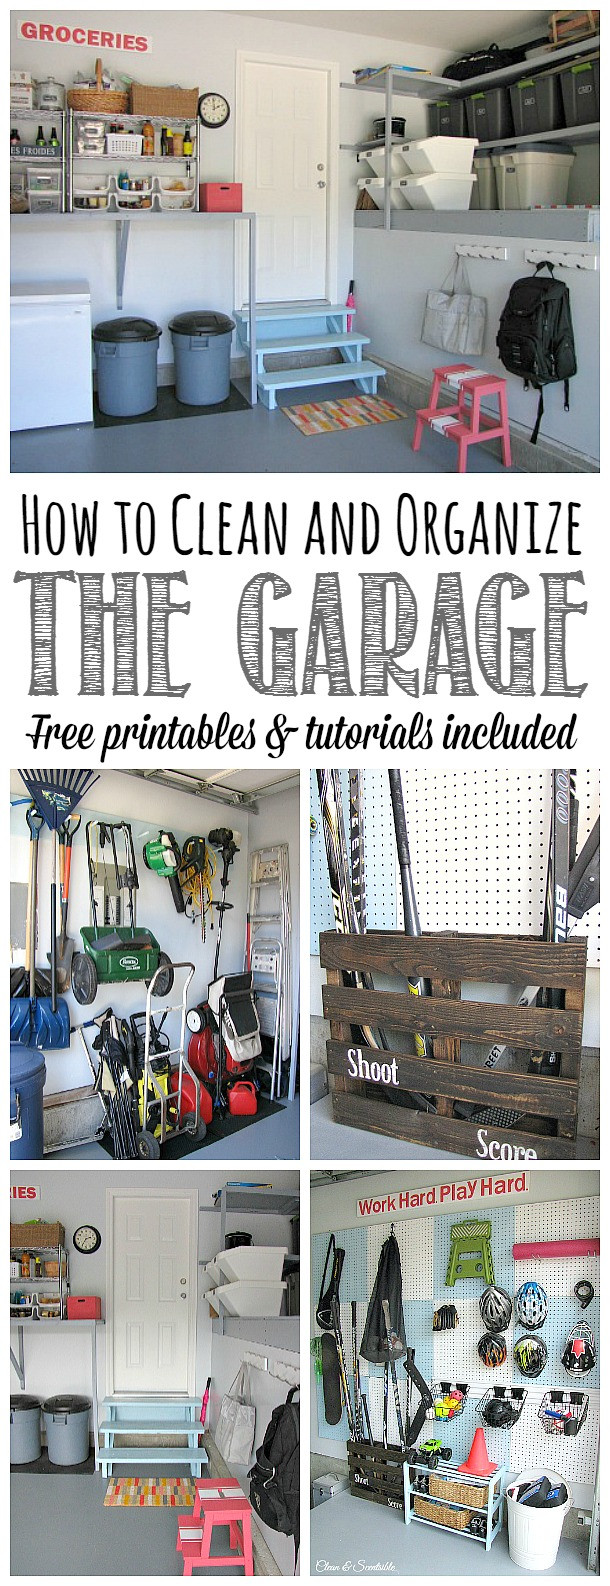 Pinterest Garage Organization
 How to Organize the Garage Clean and Scentsible